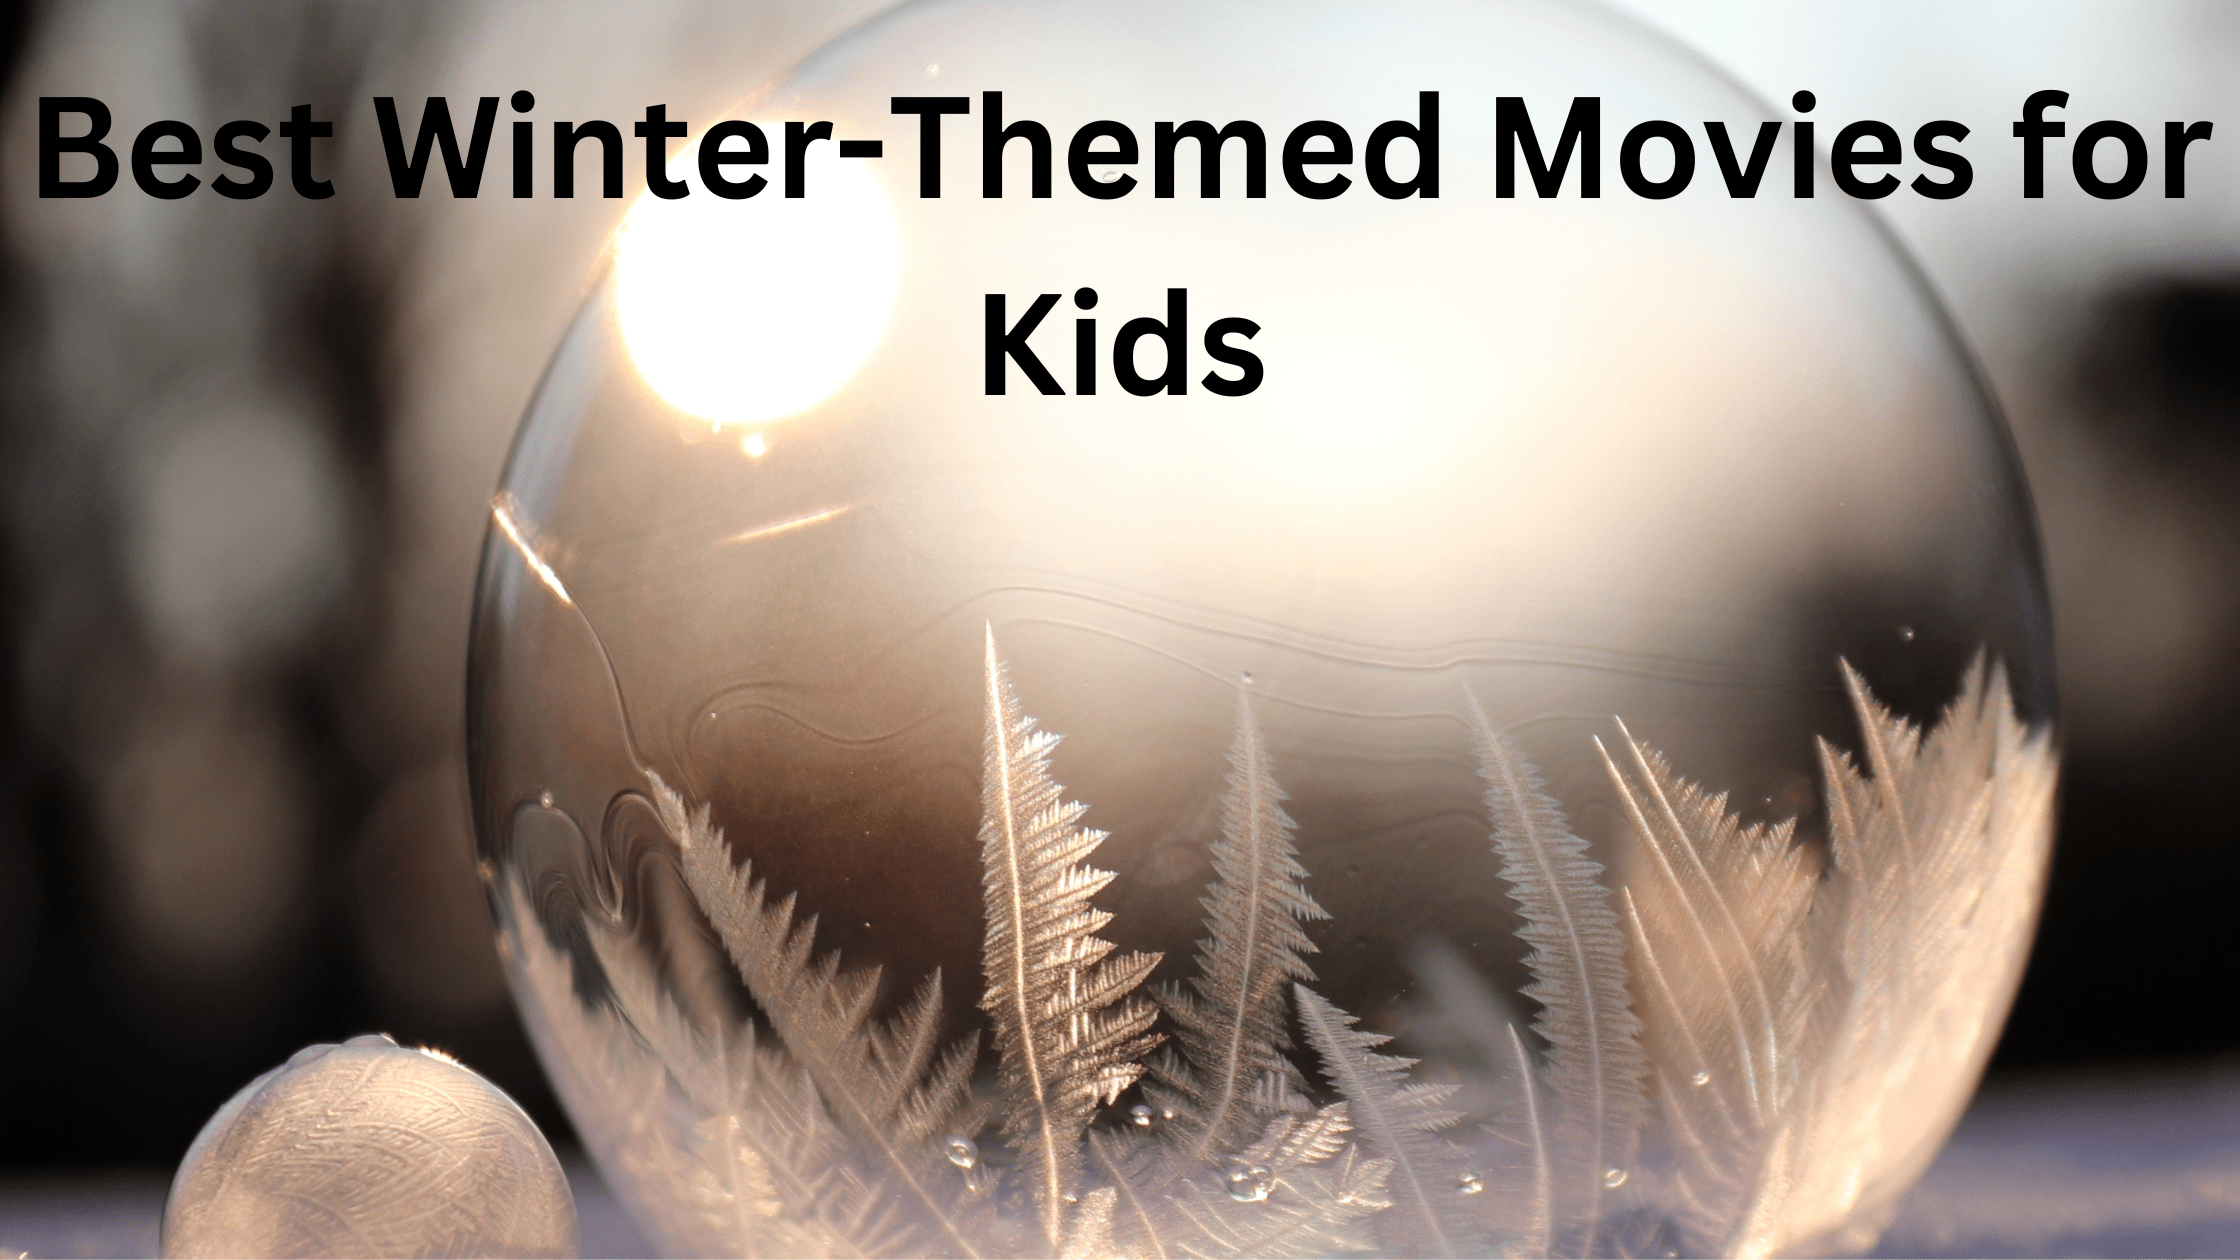 11 Best Winter-Themed Movies for Kids to Watch 32